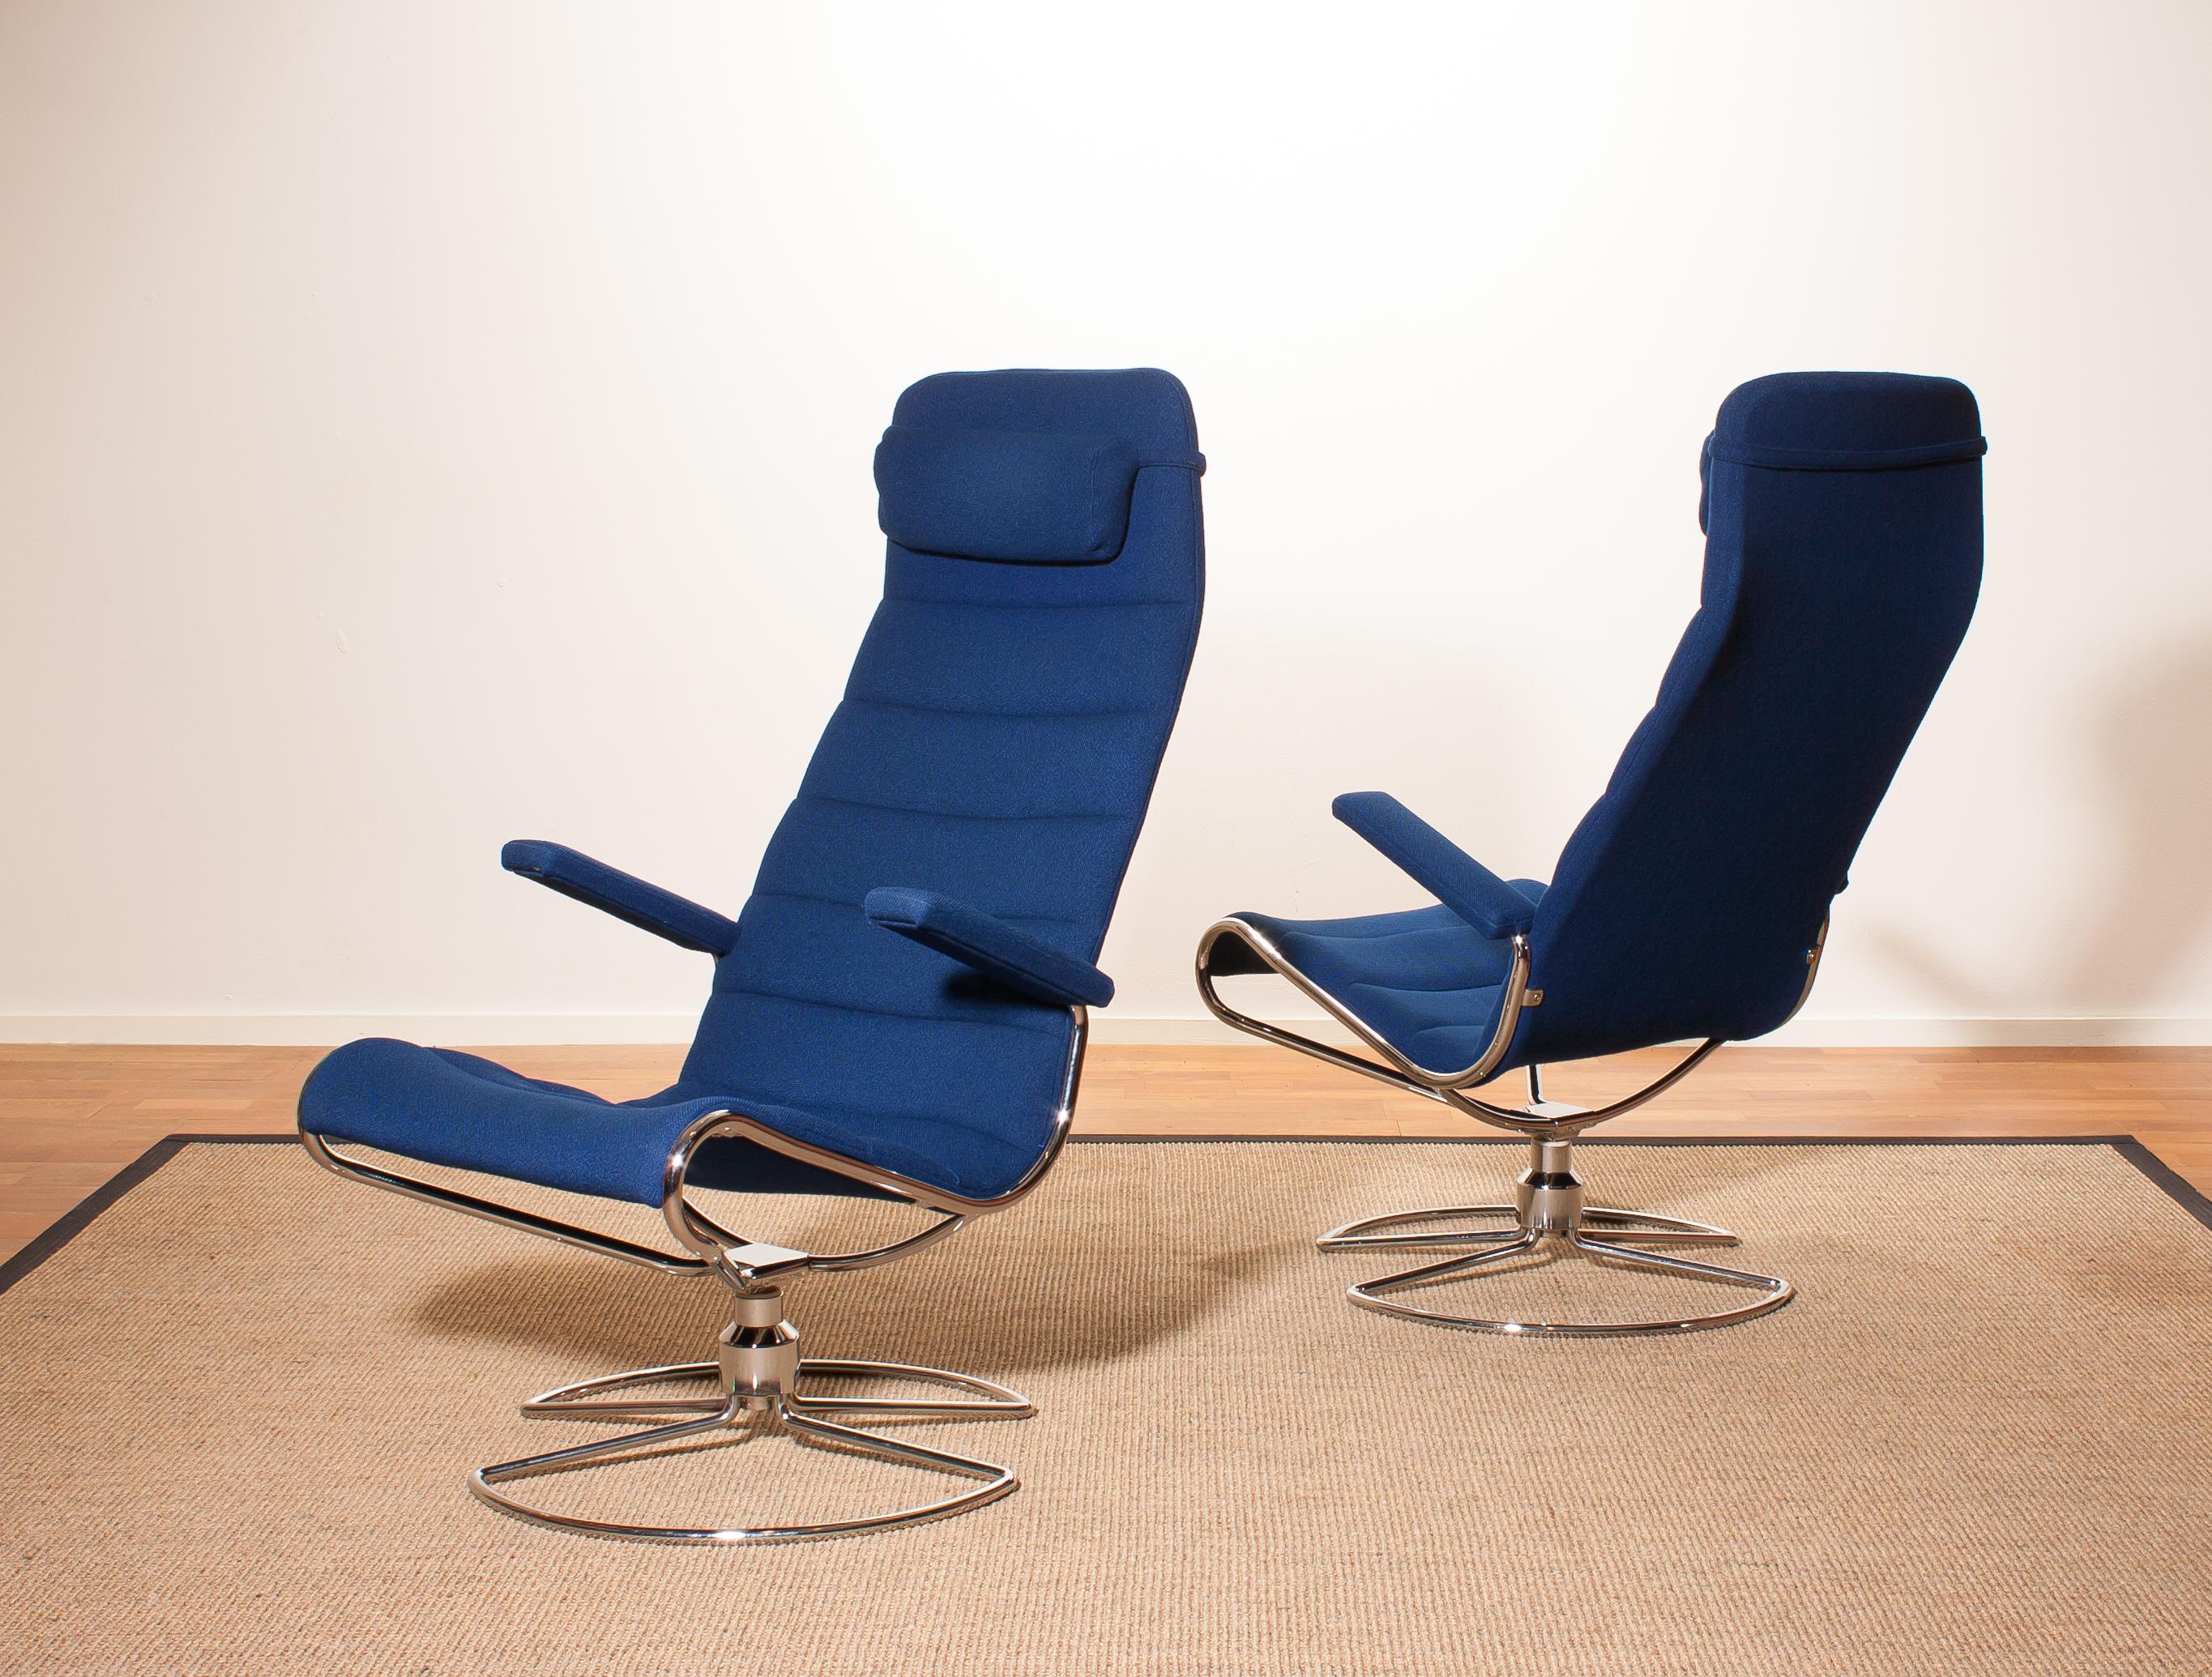 Beautiful 'Minister' chairs designed by Bruno Mathsson.
They are upholstered with a royal blue woollen fabric mounted on a swivel base of tubular chromed steel.
The chairs are in very good condition.
Period 1980s.
Dimensions: H 109 cm, W 60 cm,